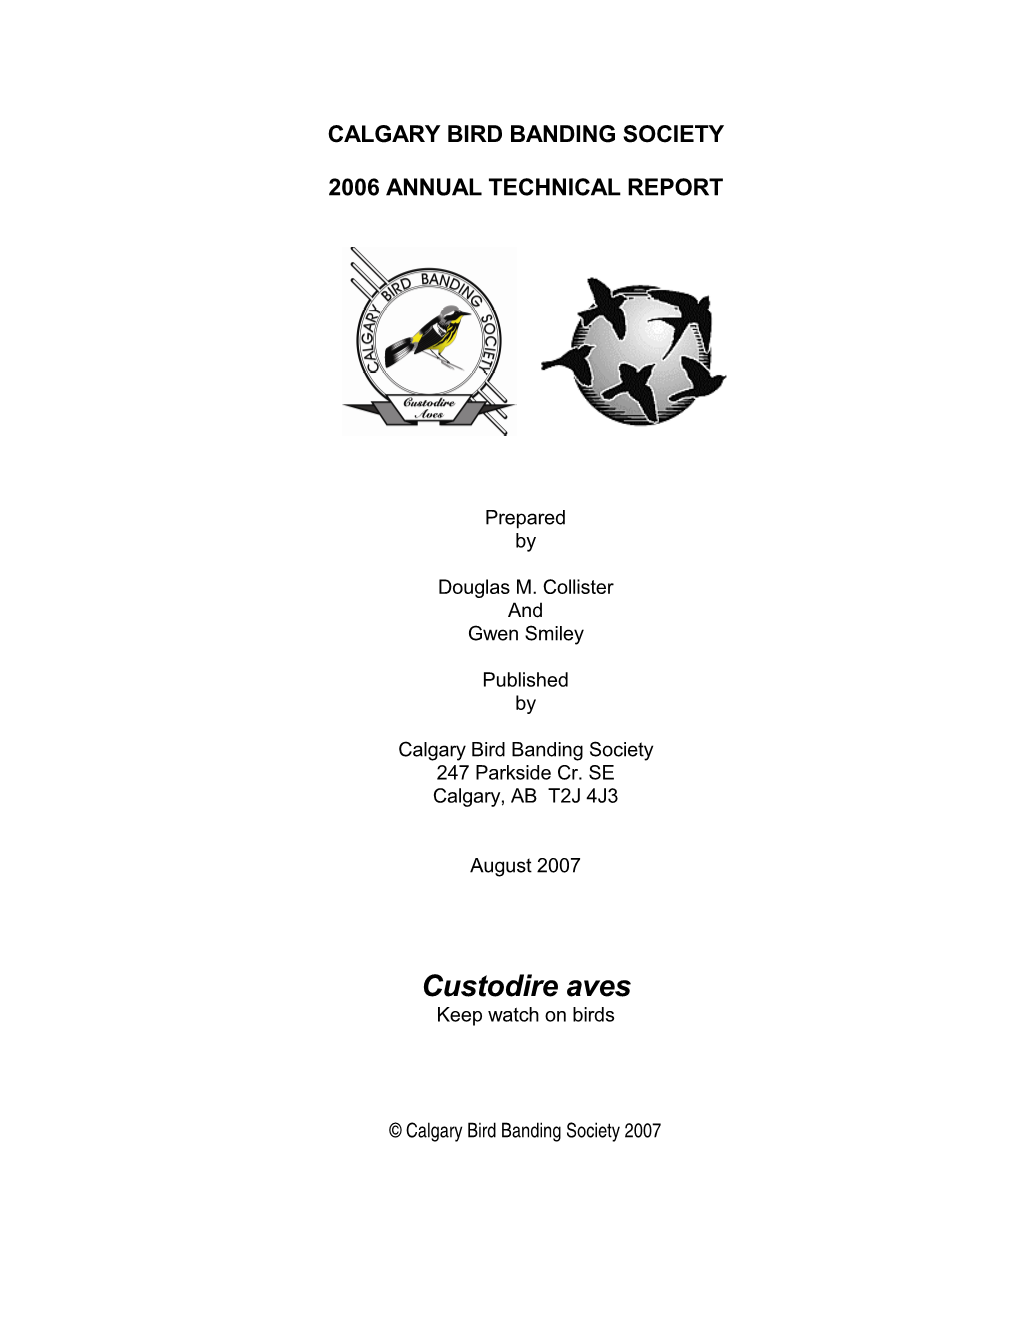 2006 Annual Technical Report